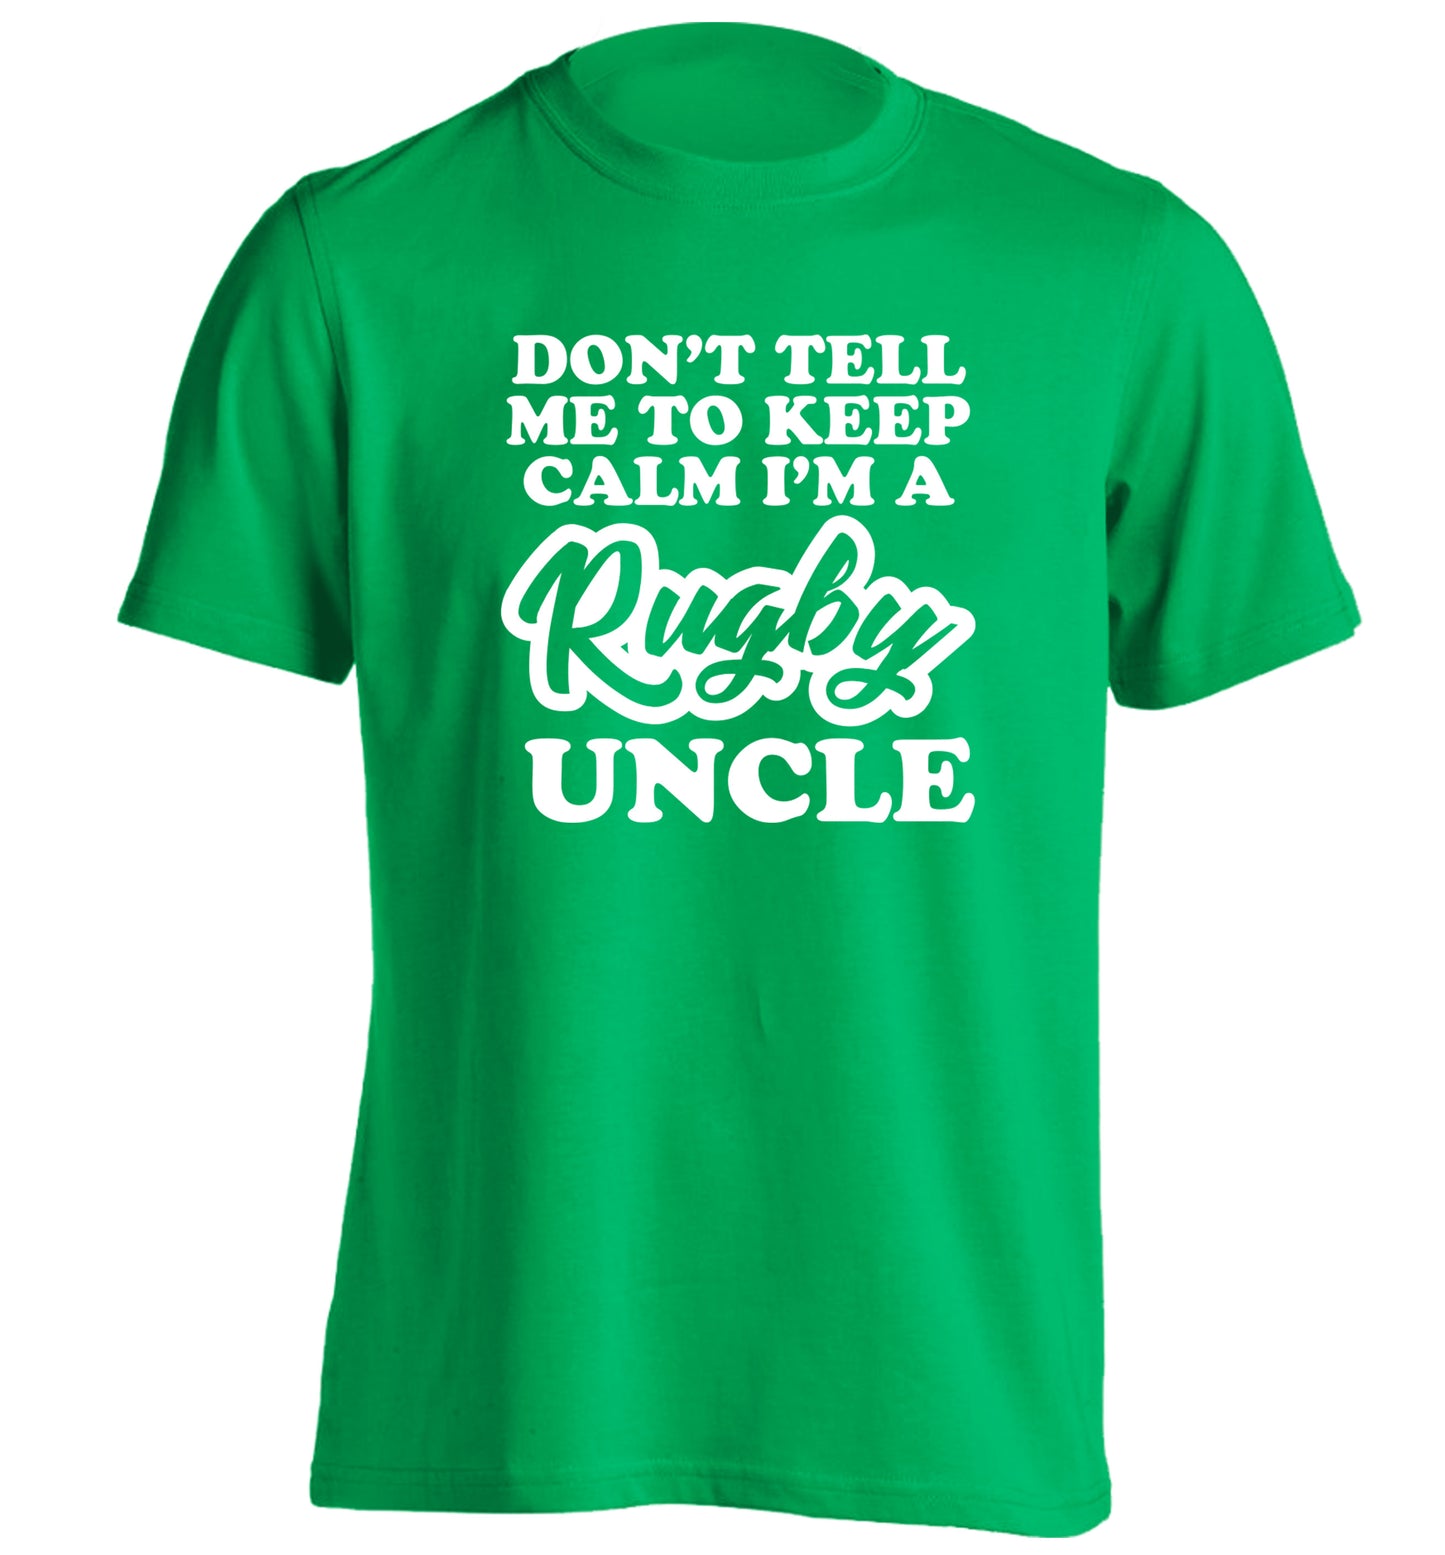 Don't tell me to keep calm I'm a rugby uncle adults unisex green Tshirt 2XL